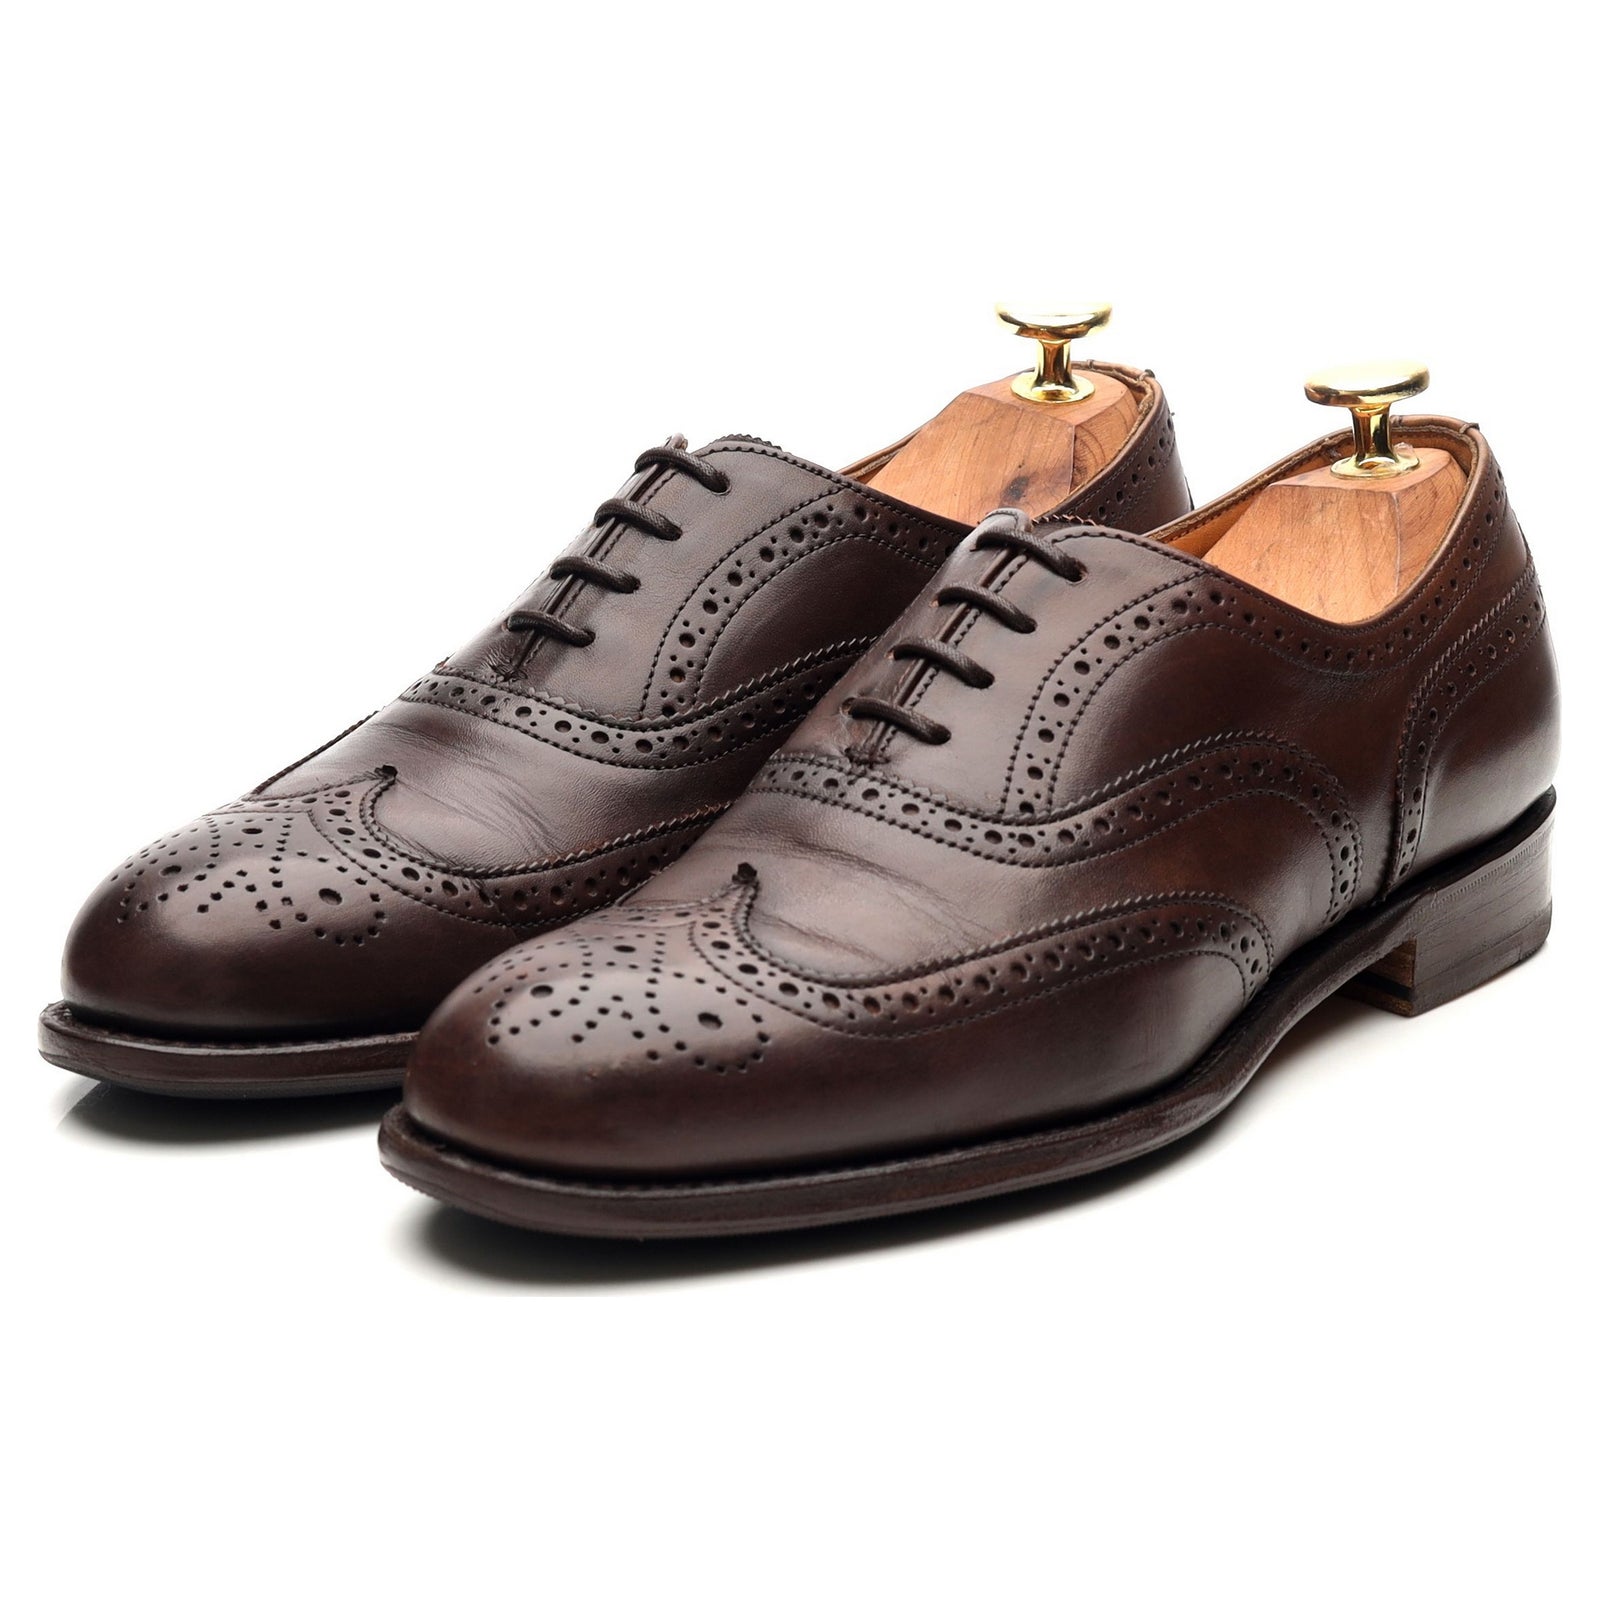 Cheaney - Abbot's Shoes